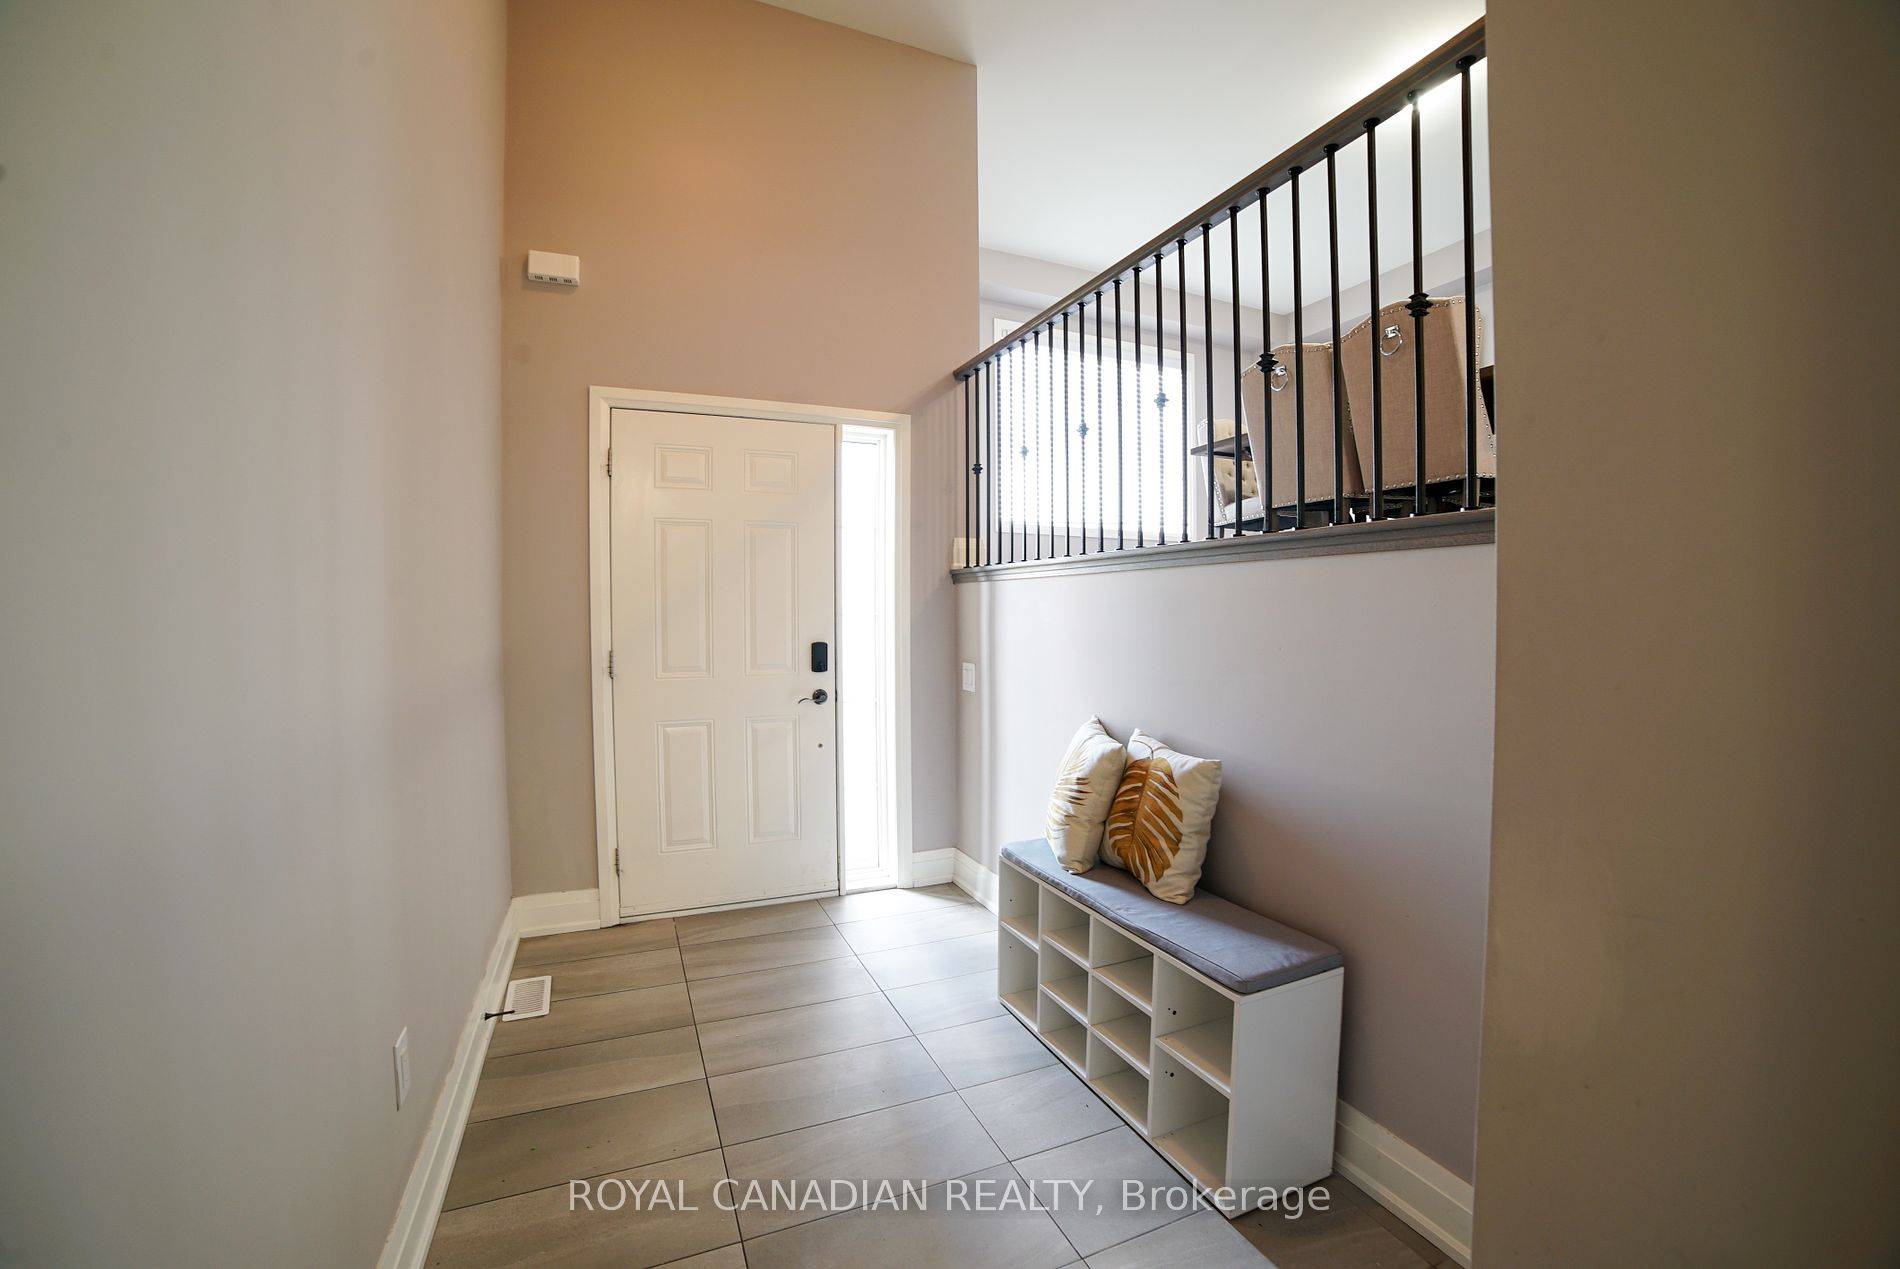 Discover a townhouse that goes beyond expectations, boasting more space than most detached homes.